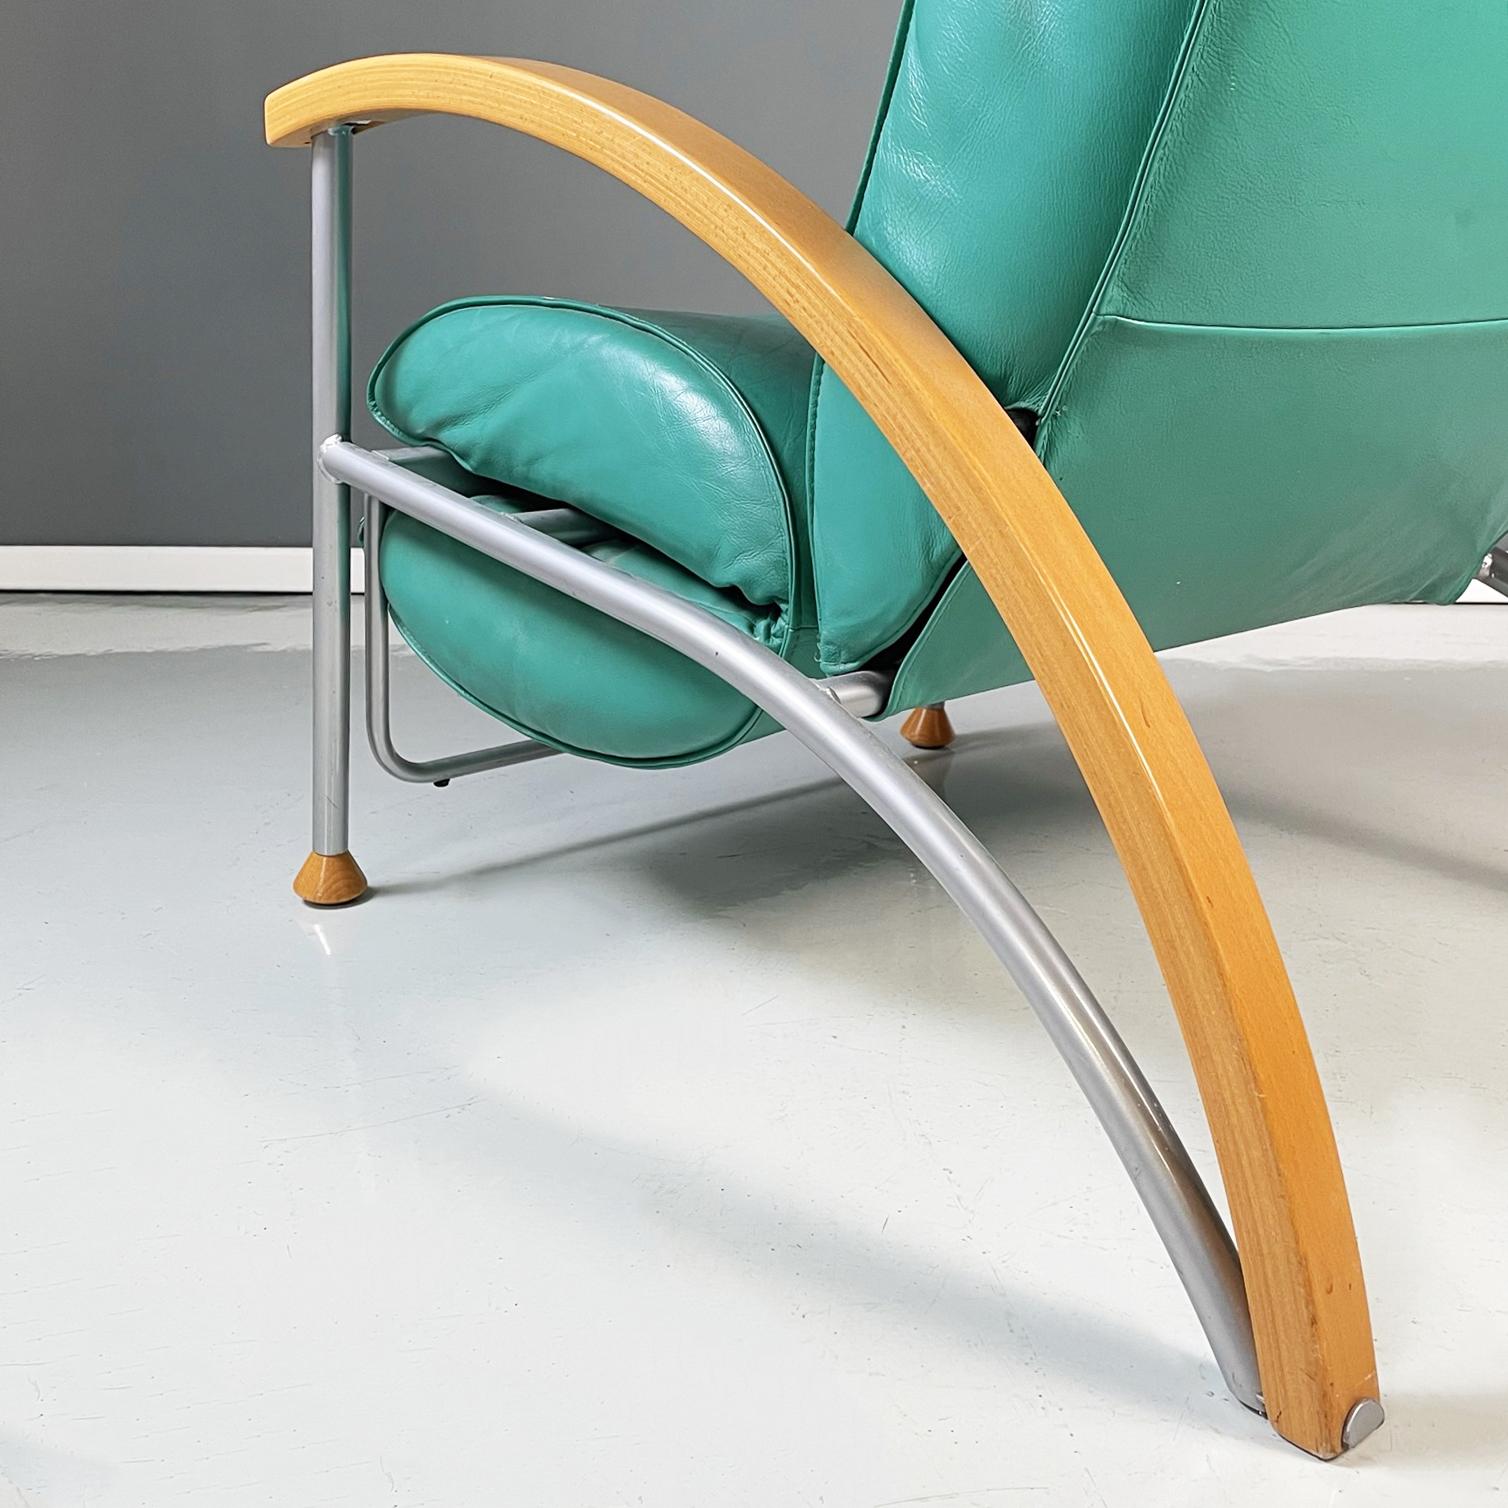 Italian Modern Armchair in Aqua-Green Leather, Wood and Metal, 1980s For Sale 9